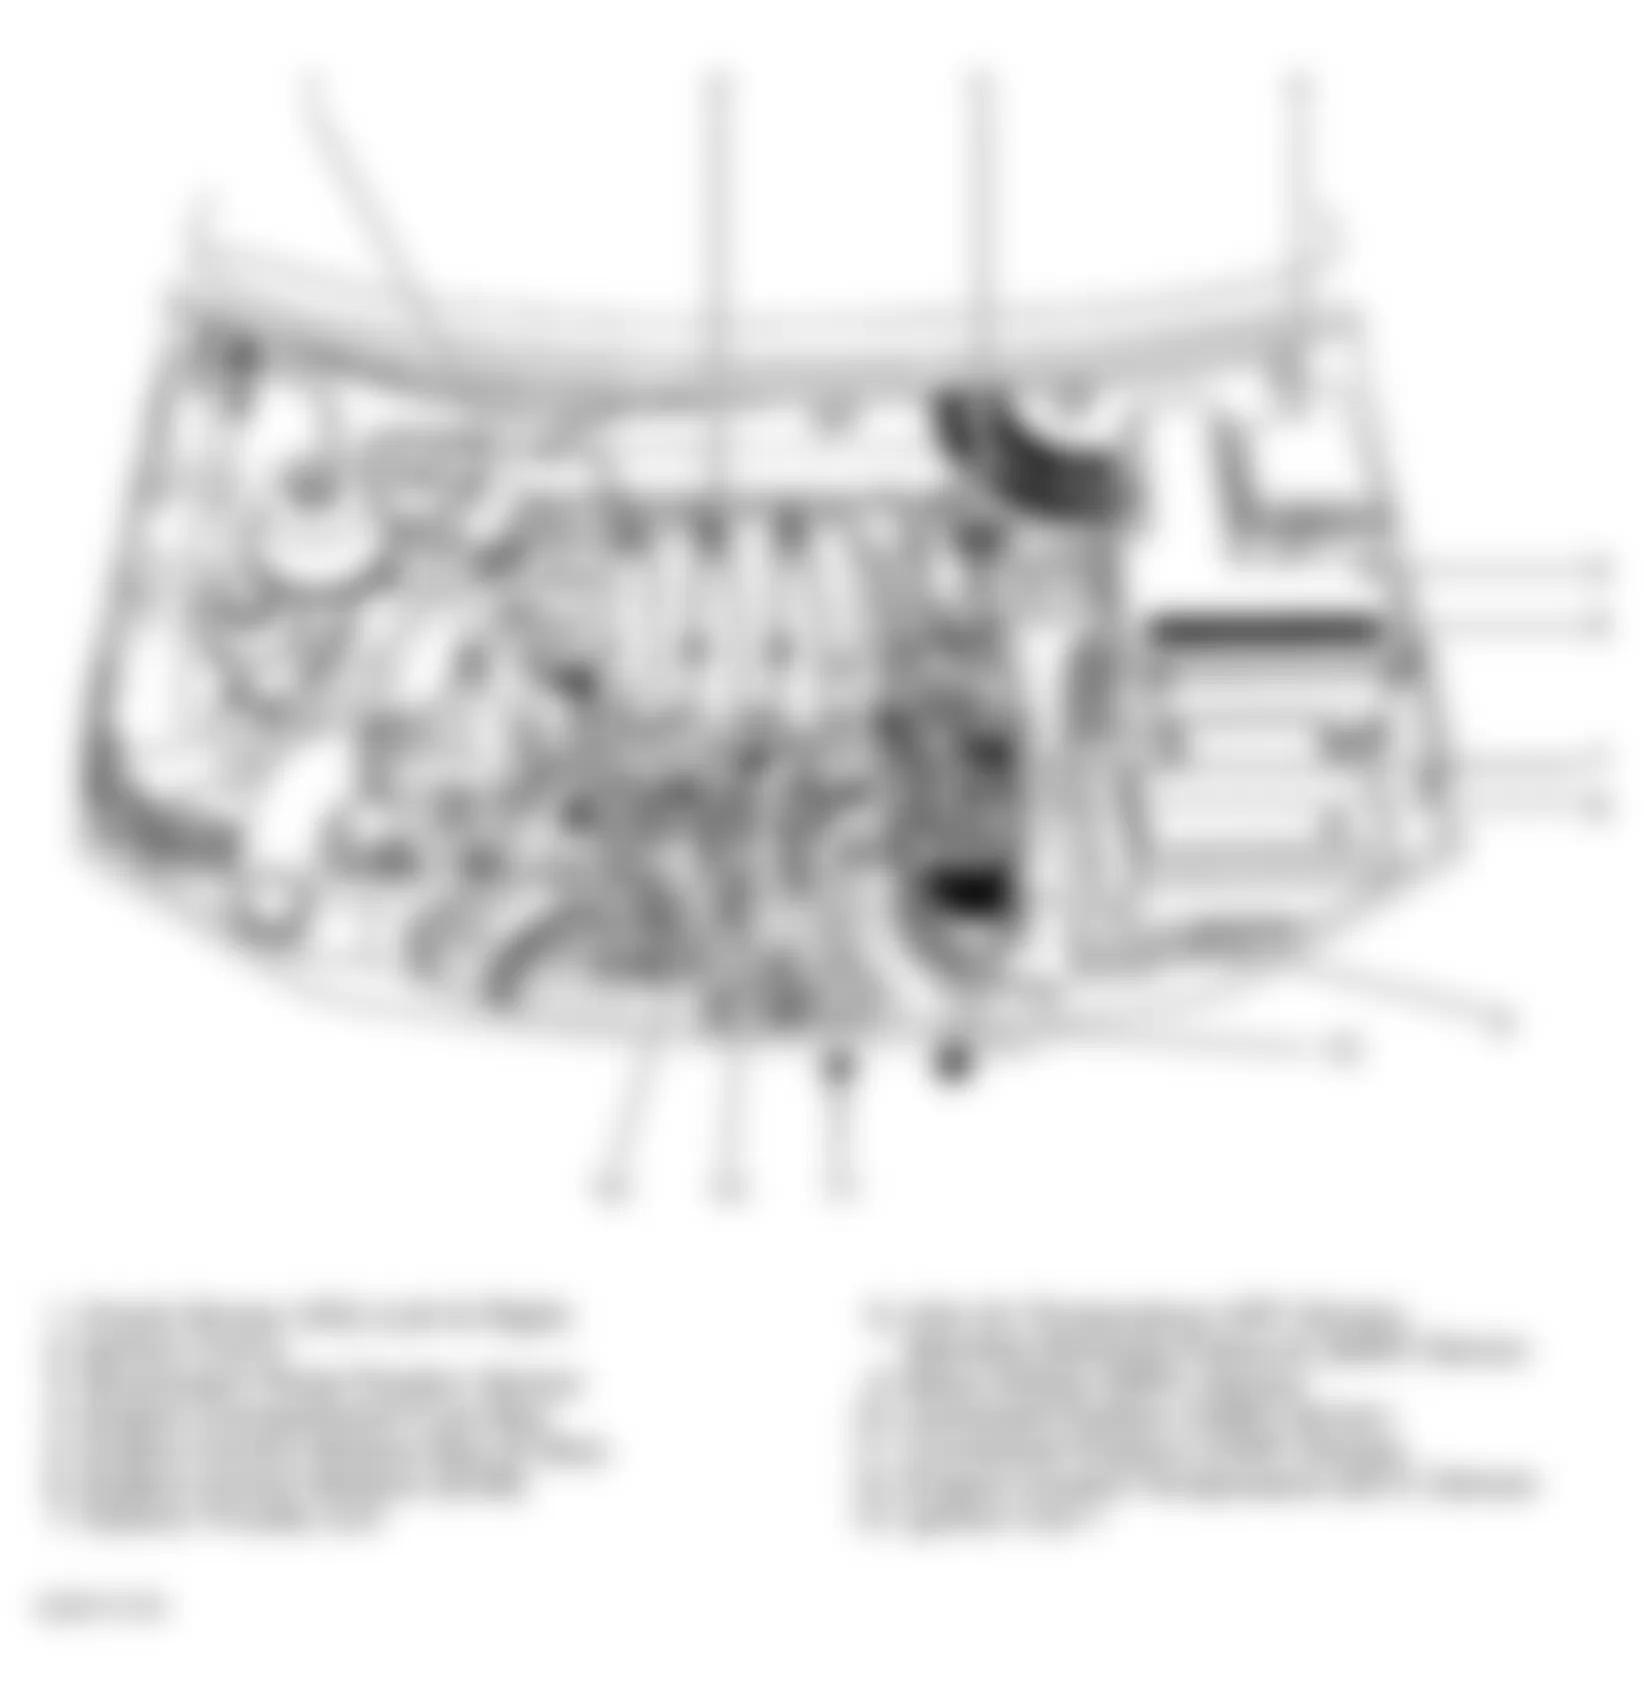 Land Rover Freelander S 2002 - Component Locations -  Engine Compartment